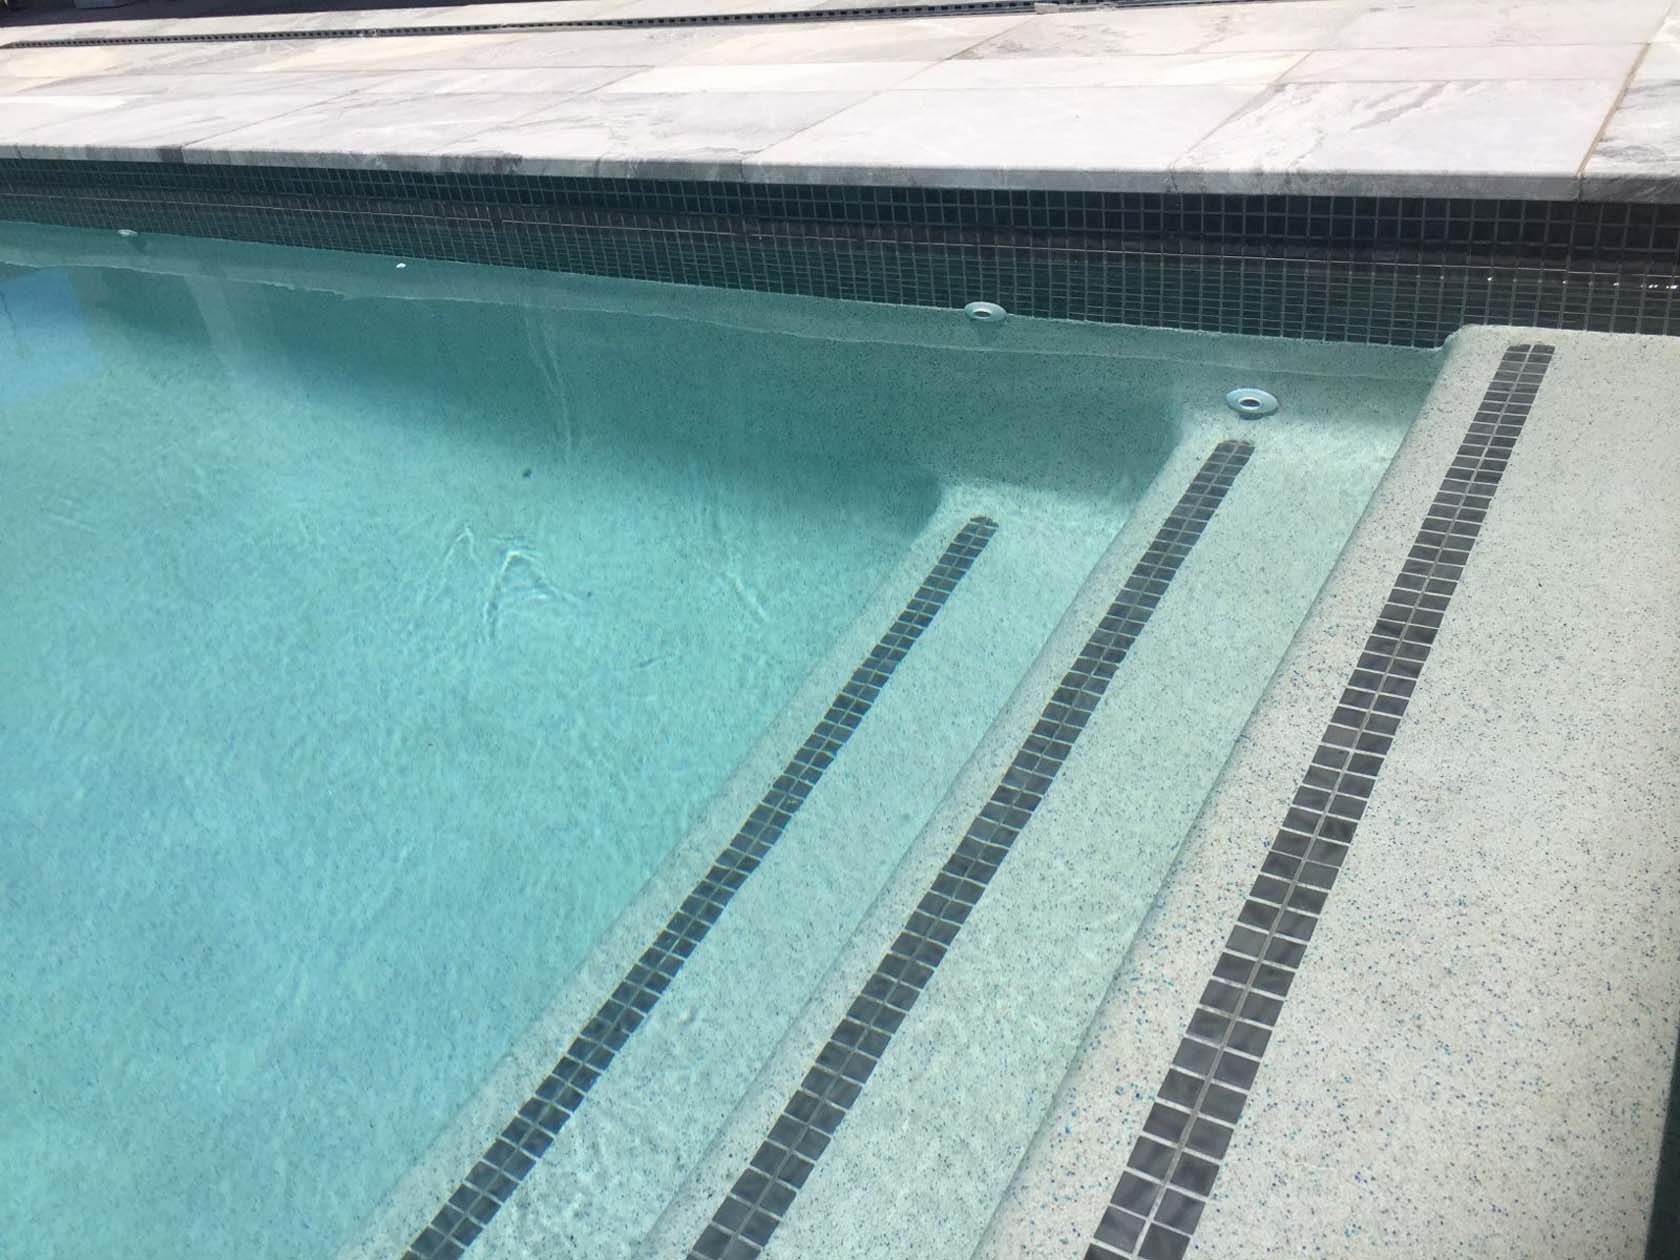 London Grey Marble pool coping  with CMC590 Graphite as waterline and step marker tiles